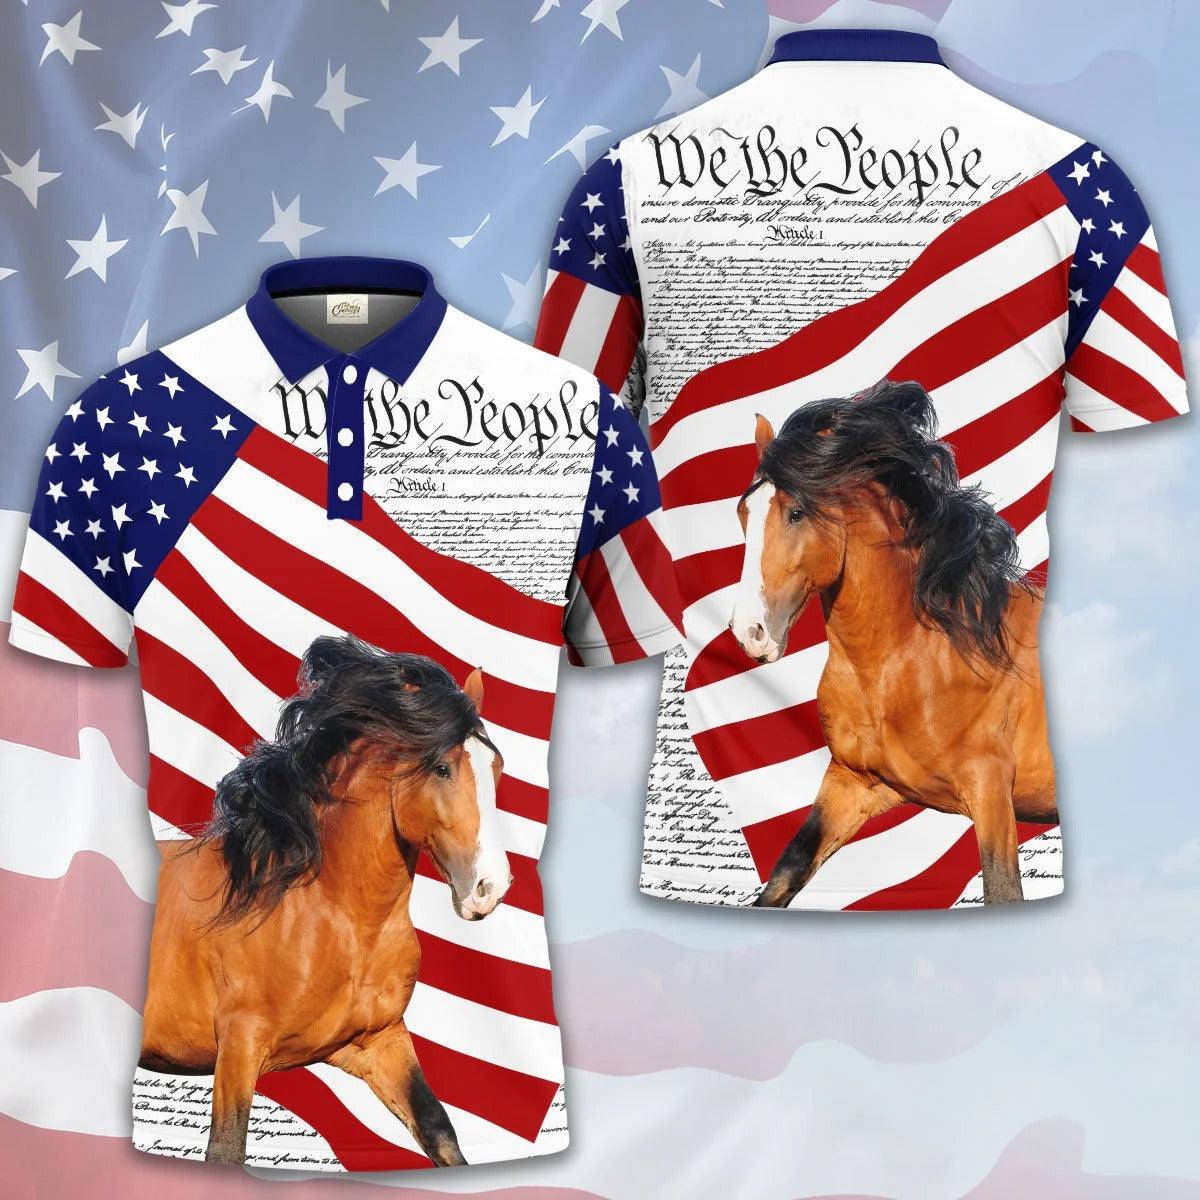 Horse Men Polo Shirts For Summer - Horse States Of America Polo Shirts For Men - Perfect Gift For Horse Lovers, Cattle Lovers - Amzanimalsgift